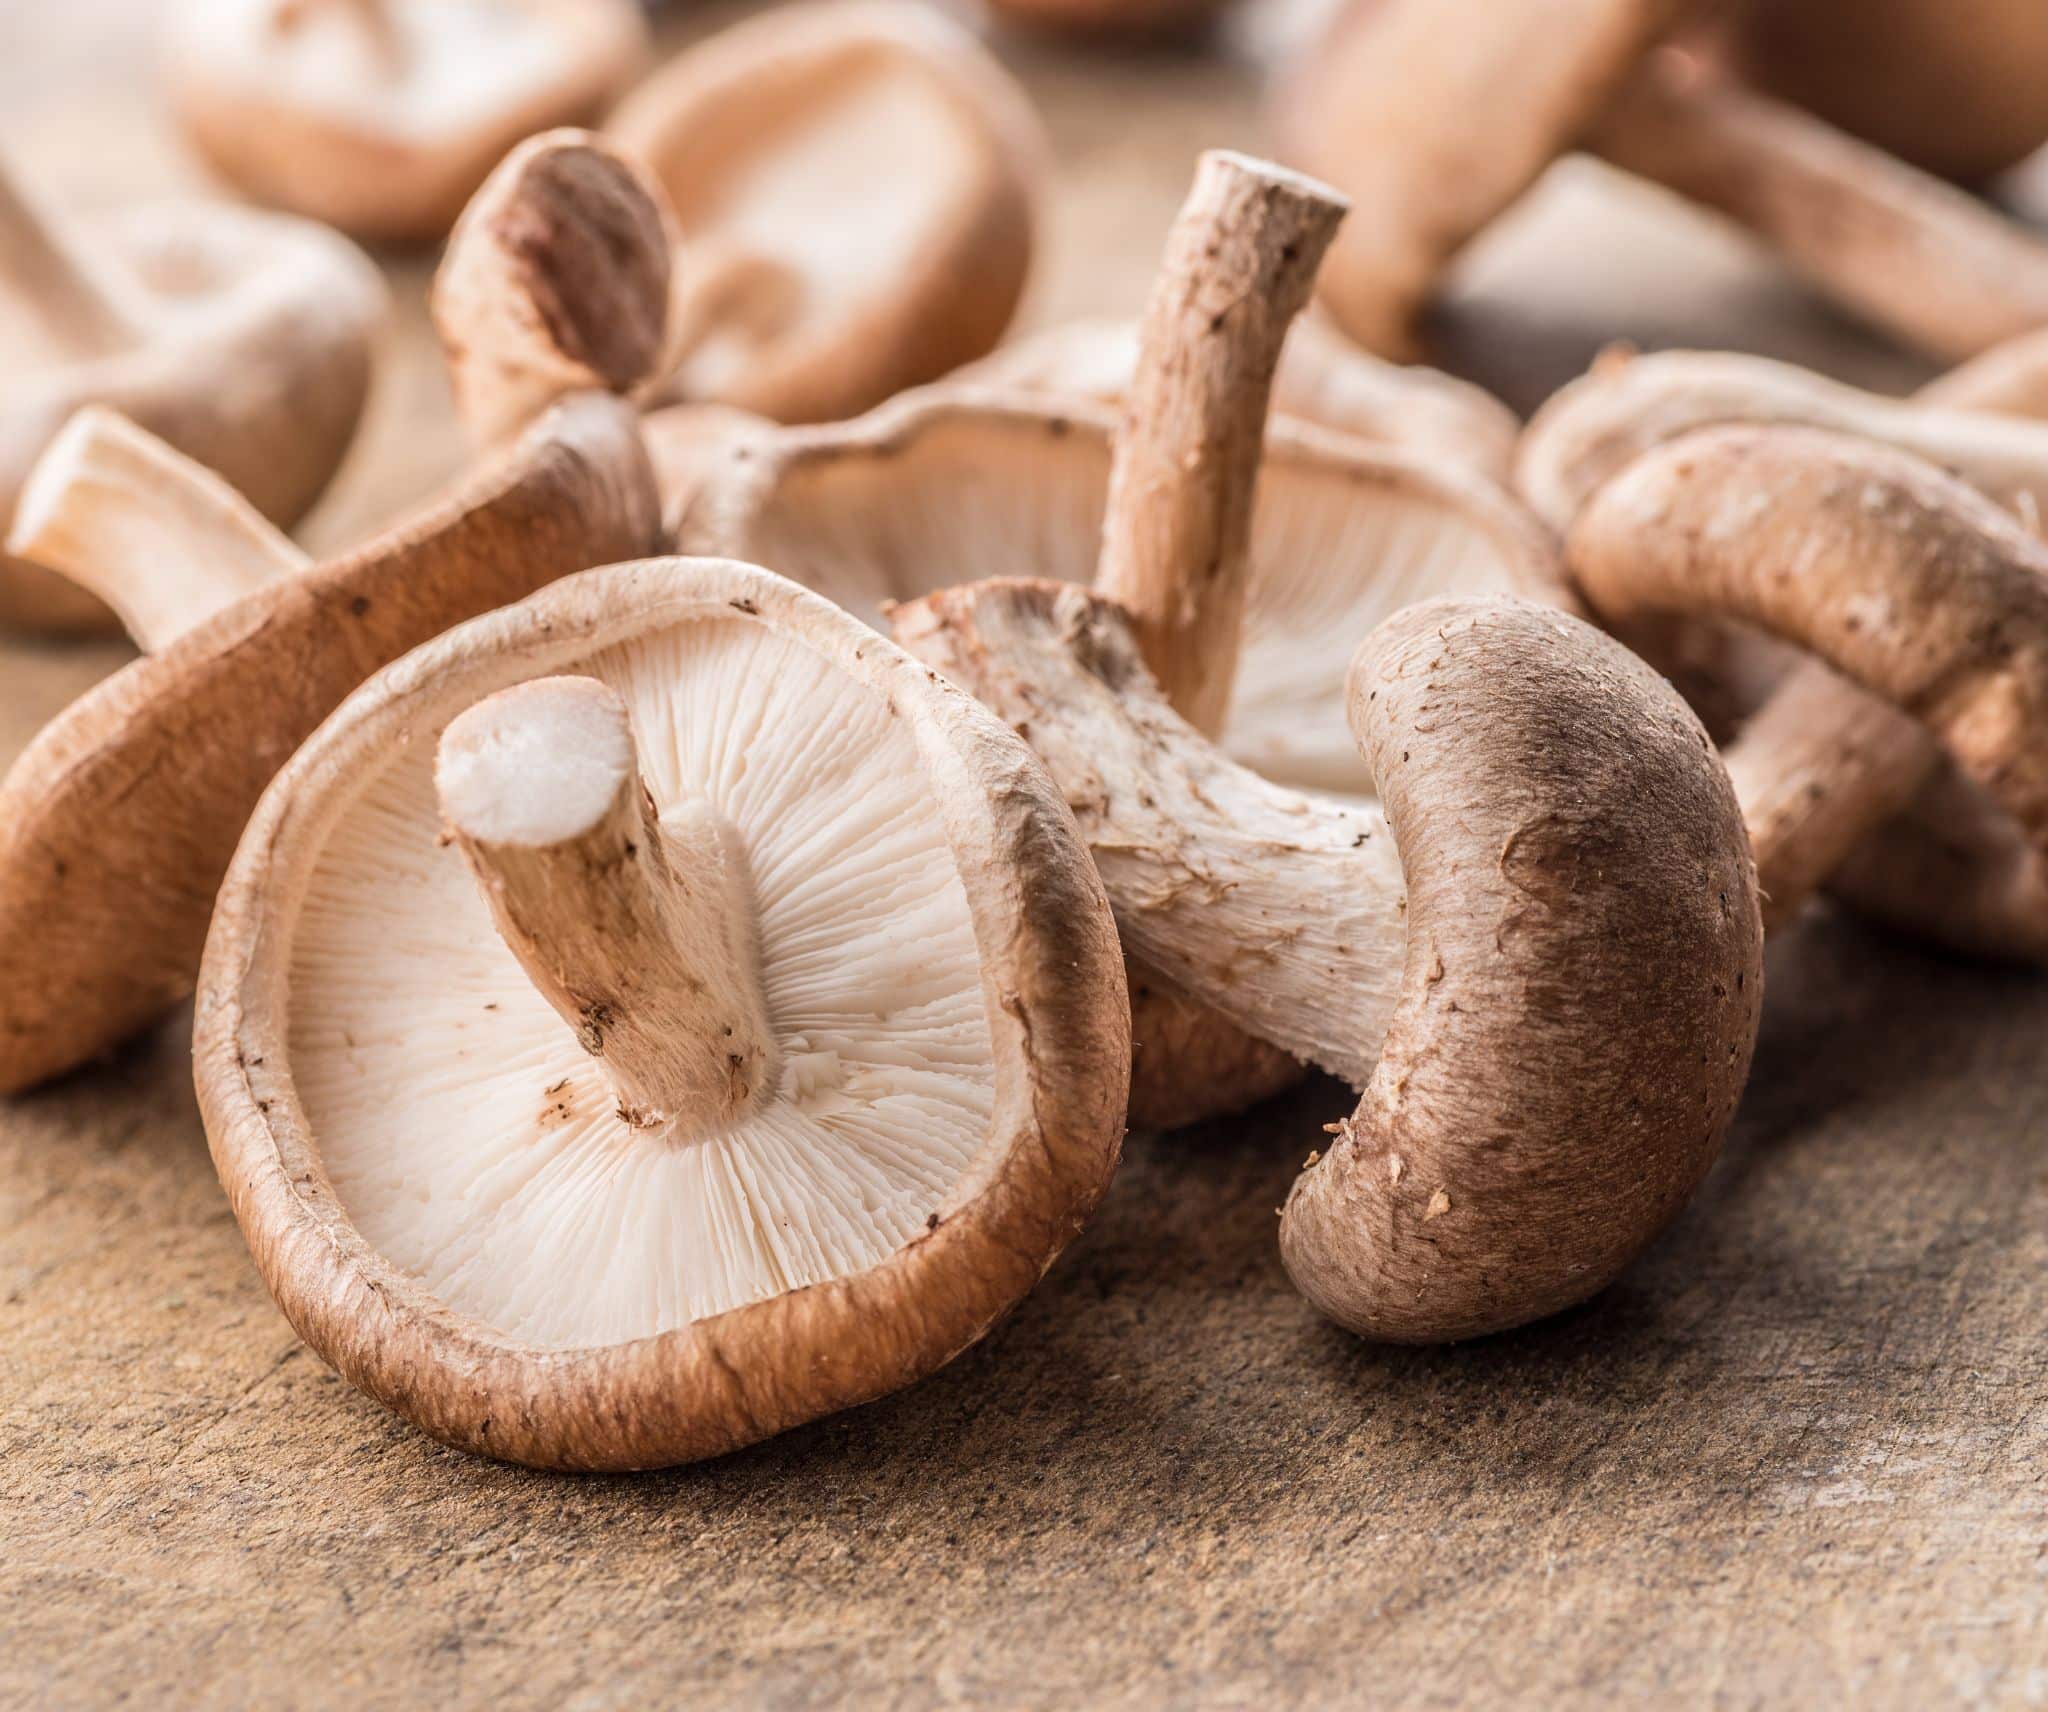 How To Know If Shiitake Mushrooms Are Bad